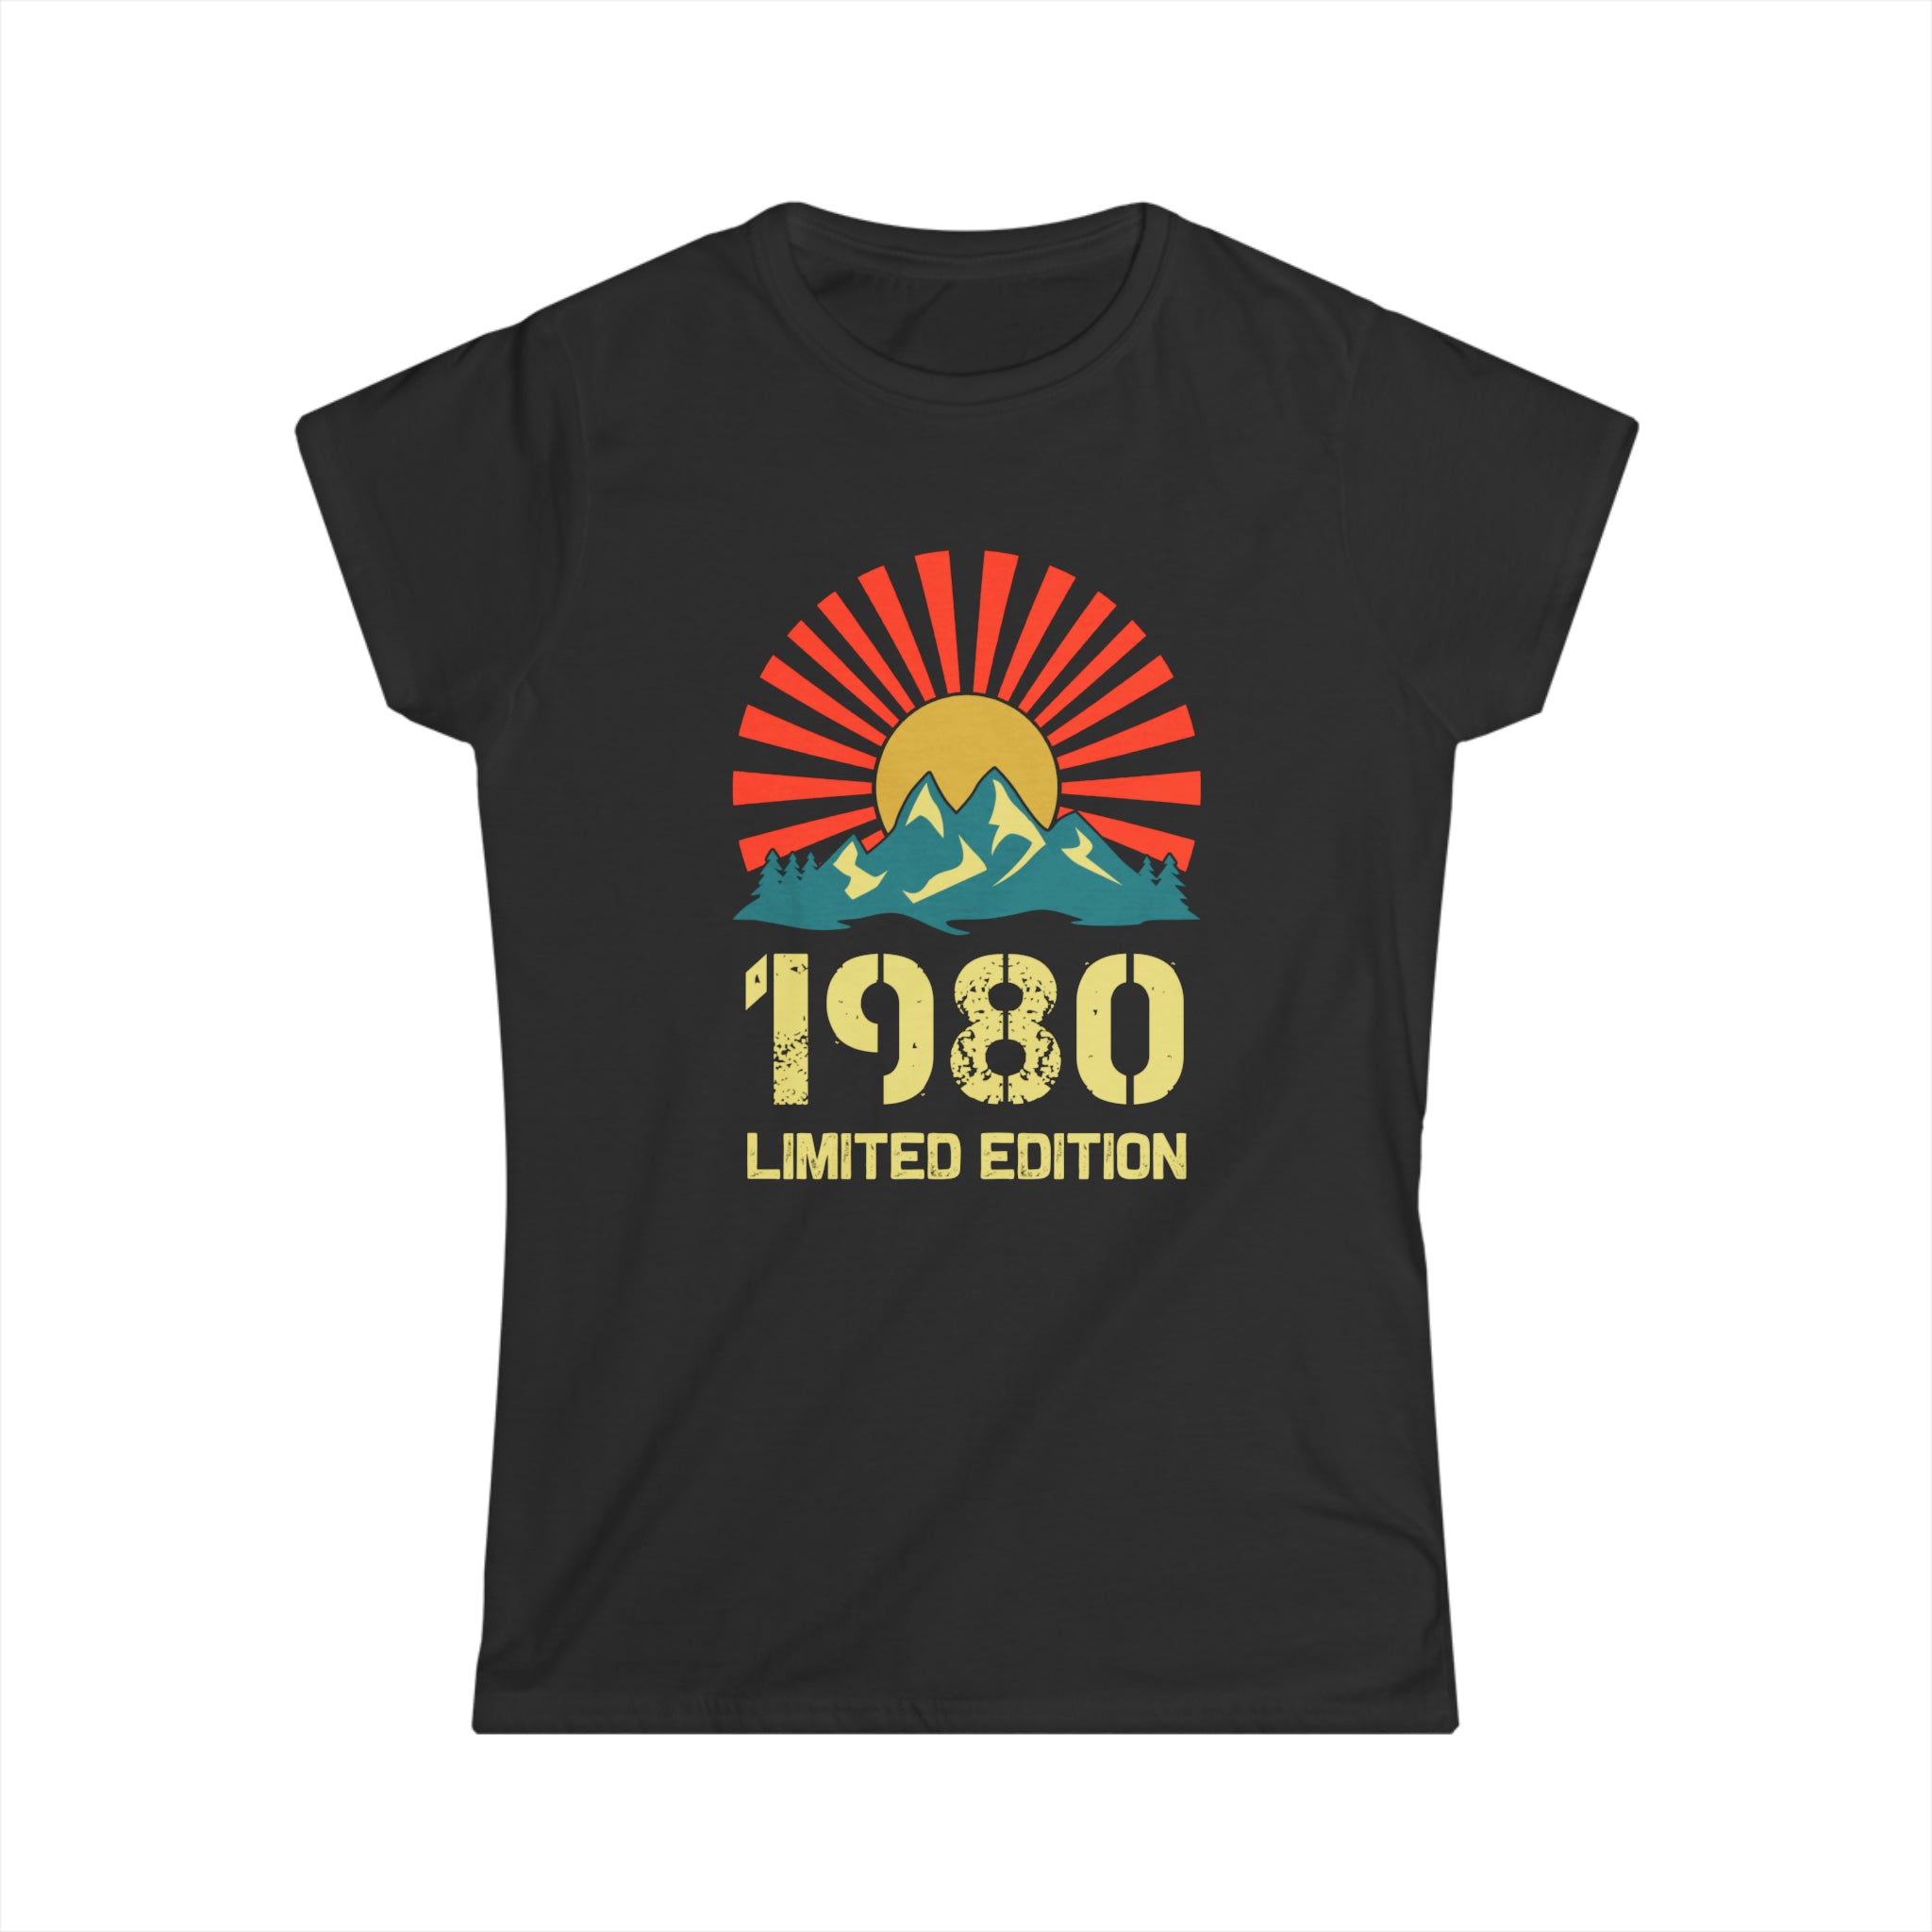 Vintage 1980 Limited Edition 1980 Birthday Shirts for Women Women Tops